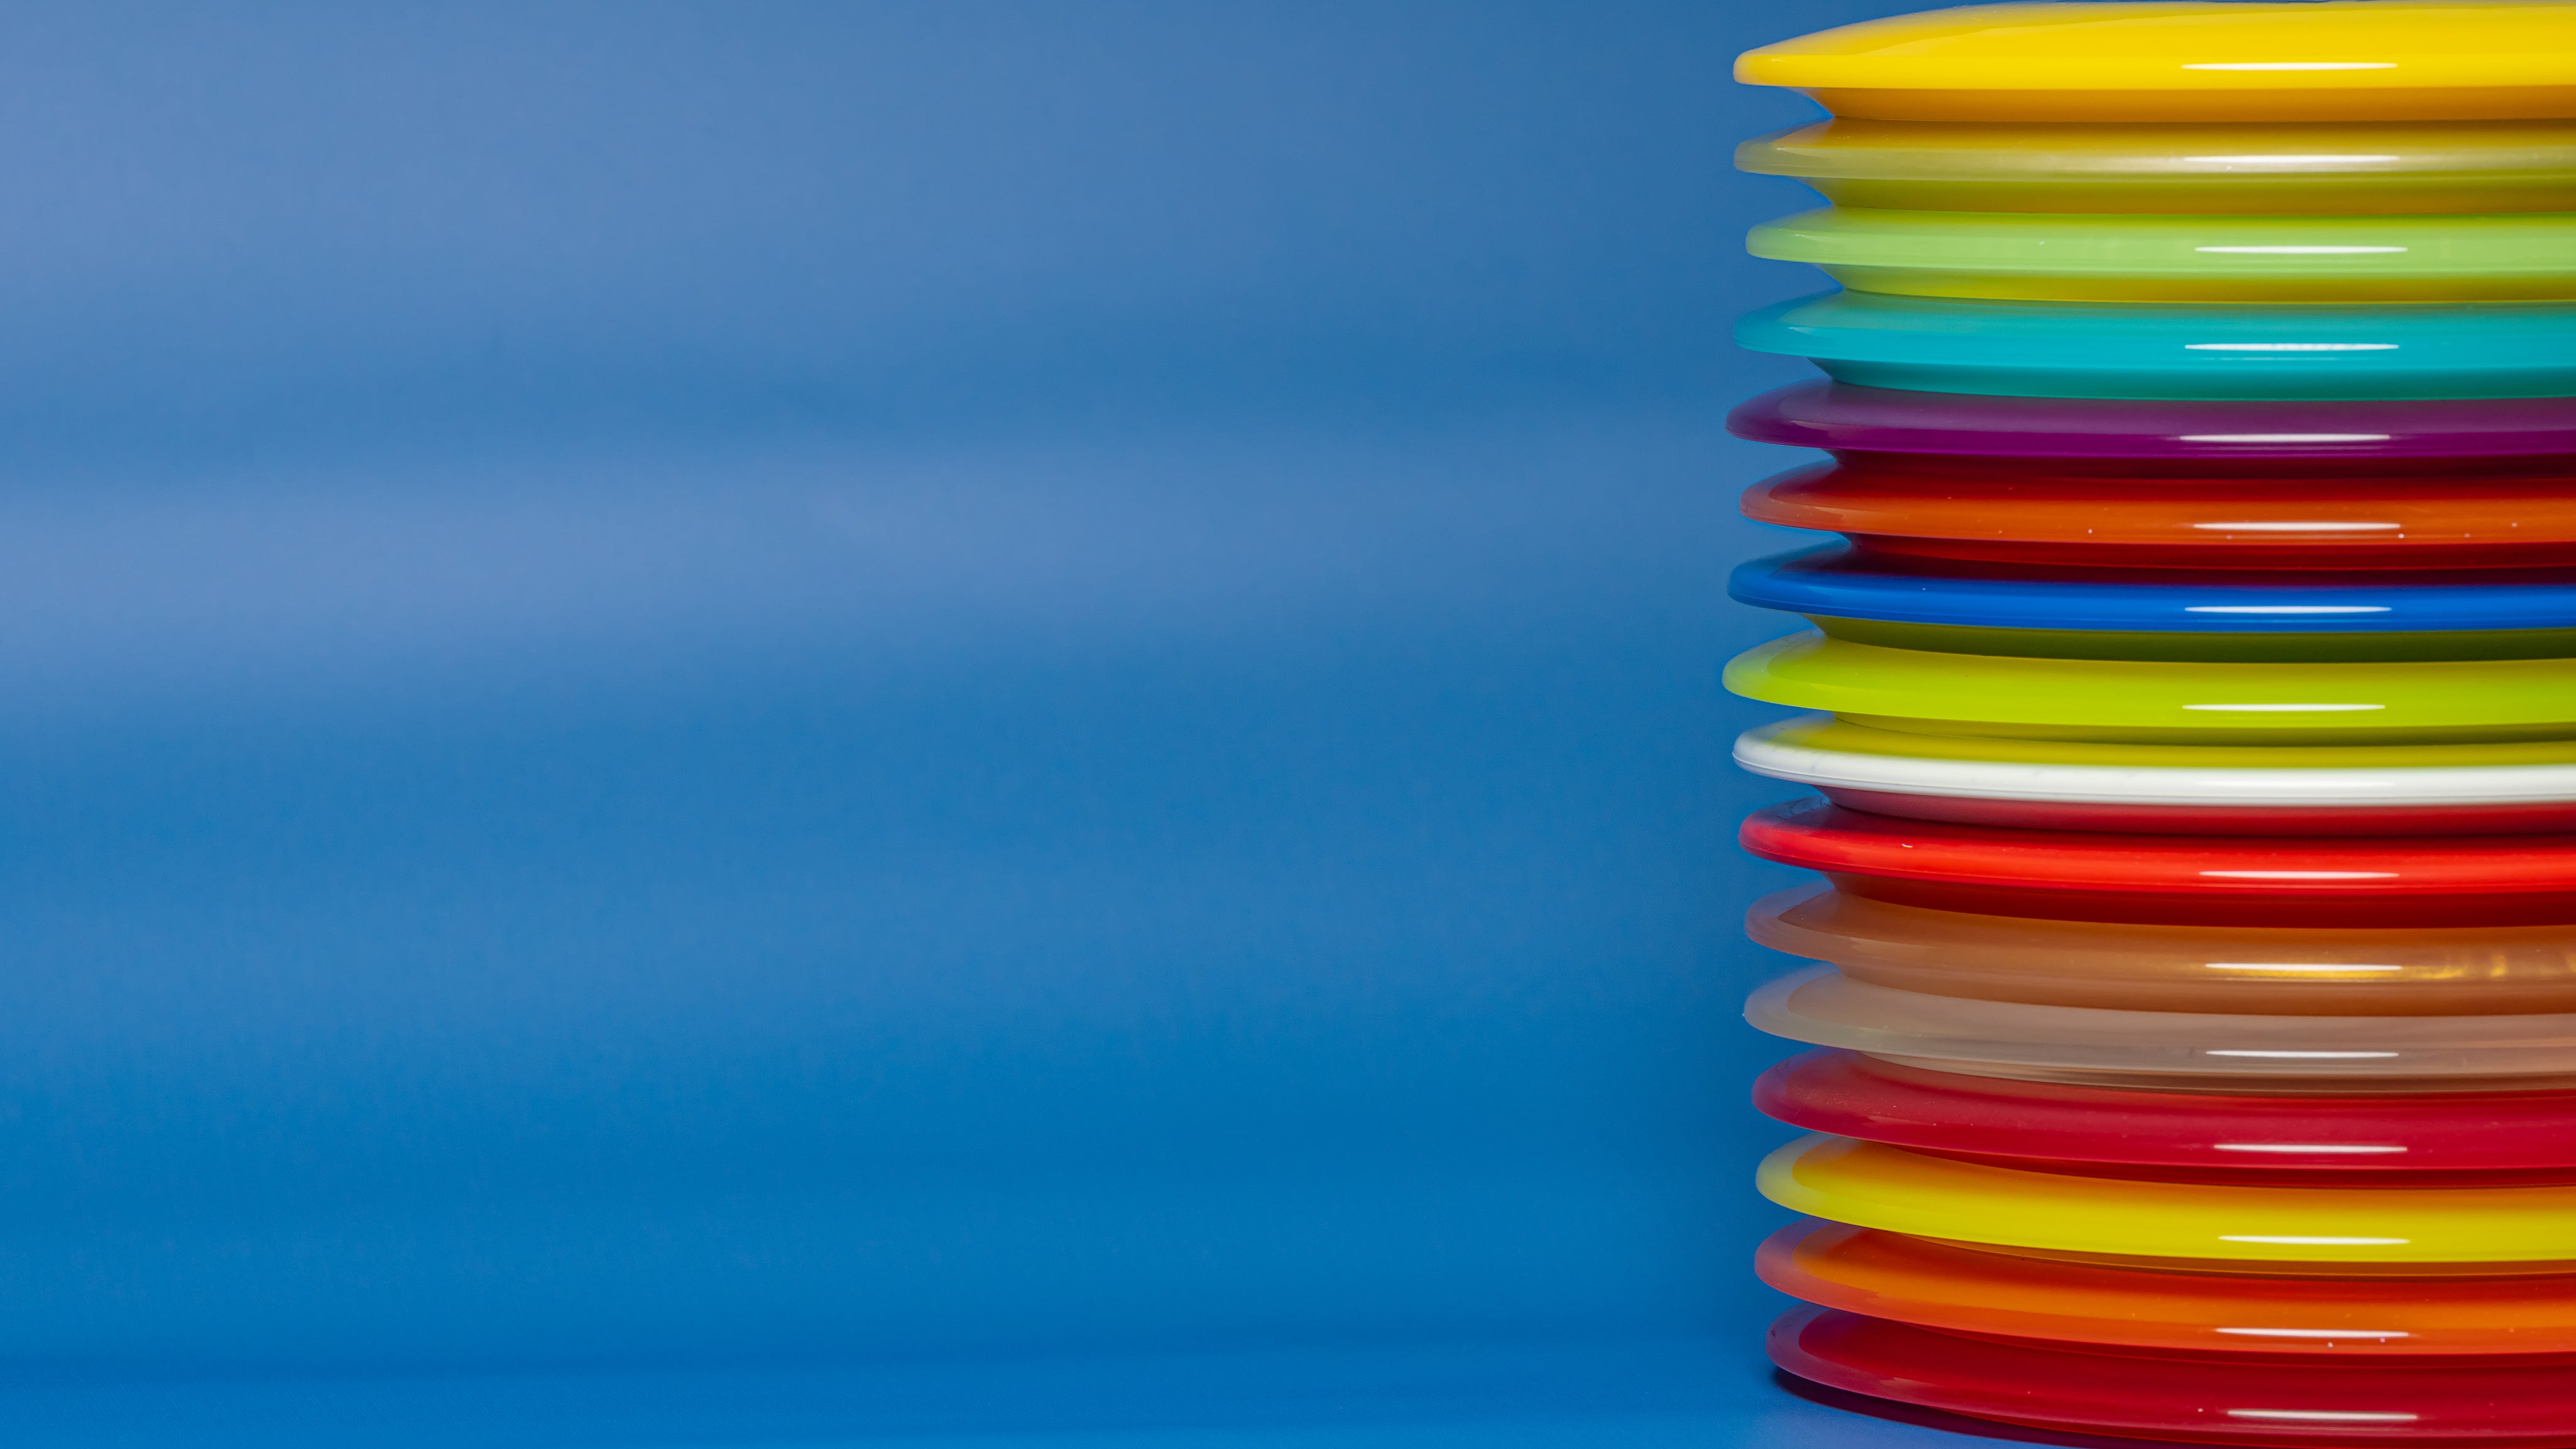 Stack of disc golf discs on a blue background